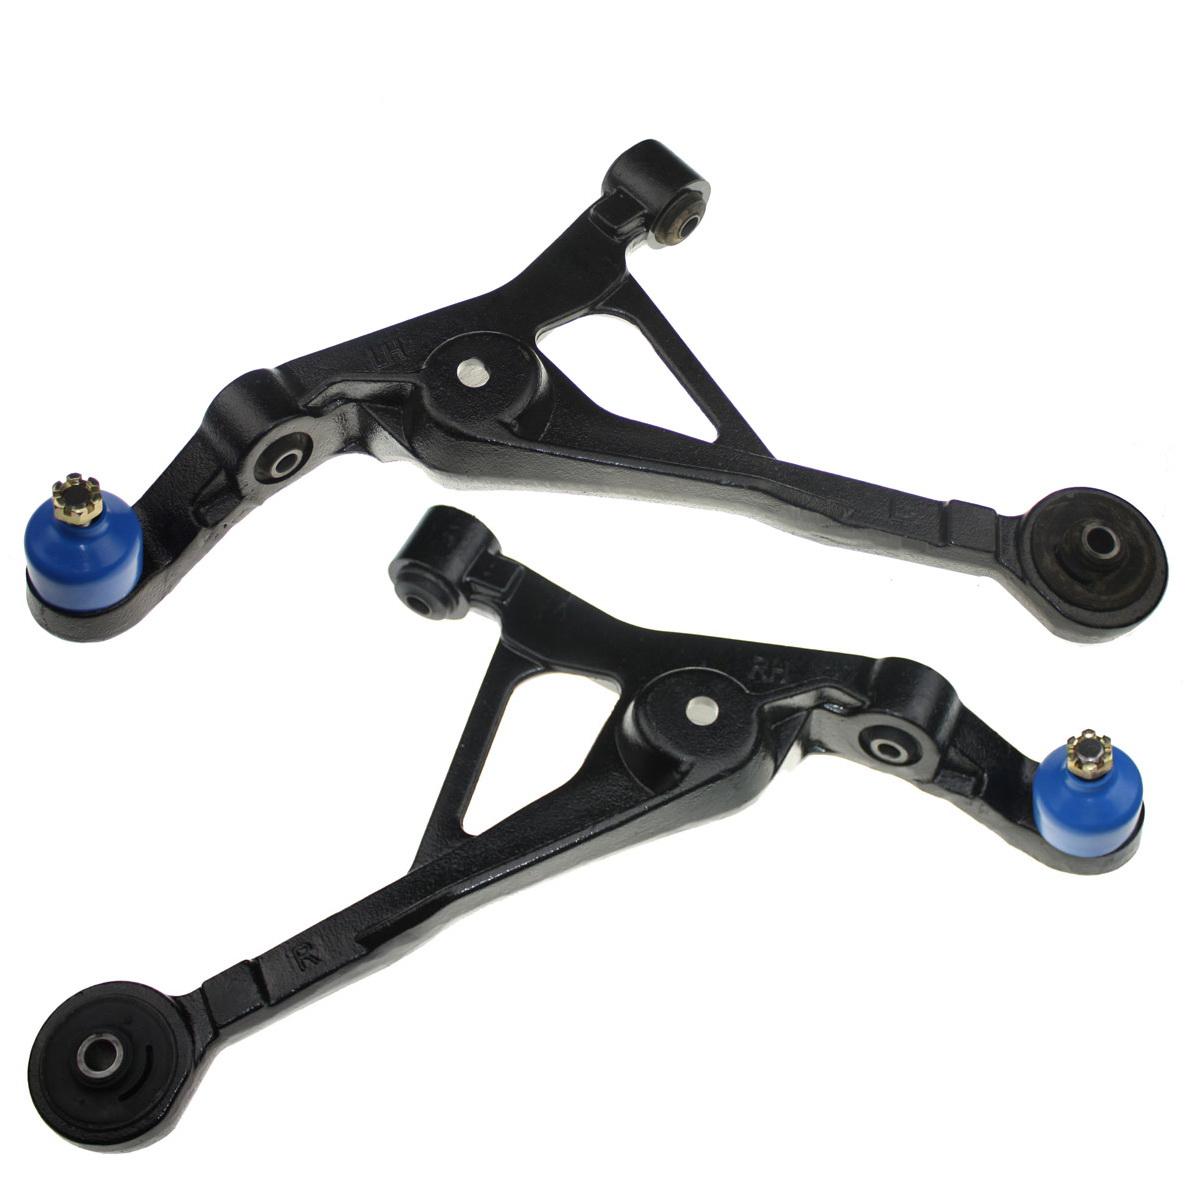 New 2Pcs Front Lower Control Arms For Strayus Sebring Cirrus Breeze K7425 K7427